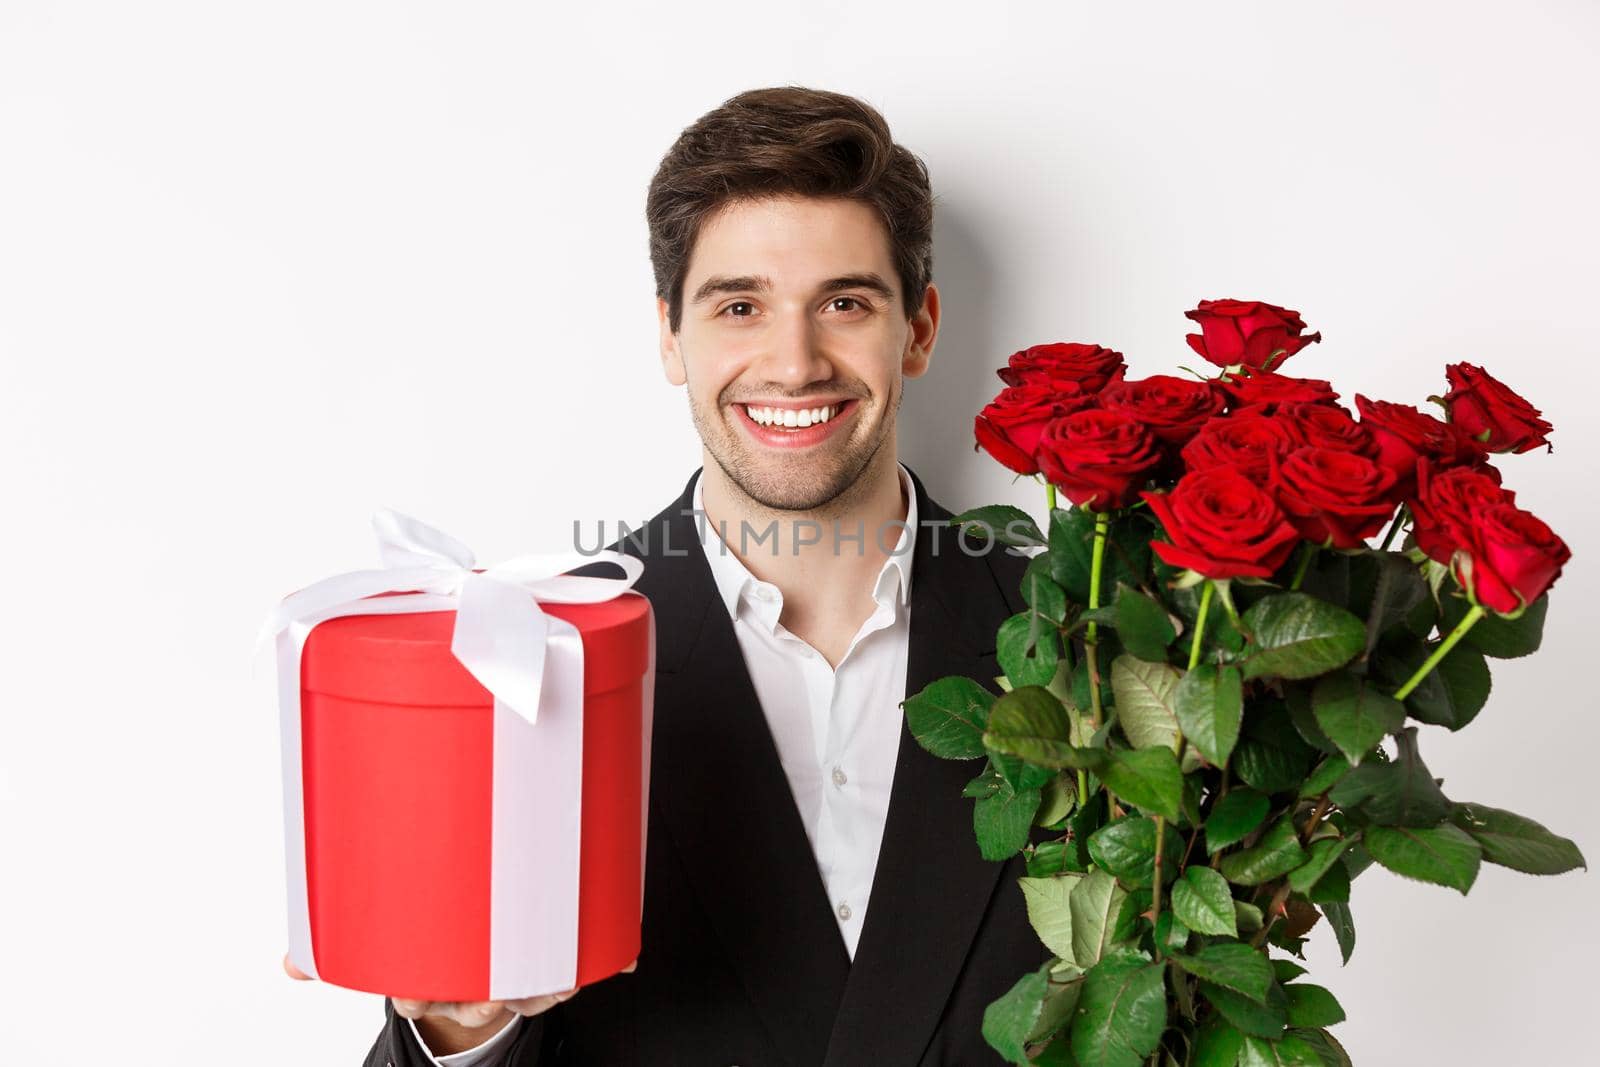 Close-up of handsome bearded man in suit, holding present and bouquet of red roses, smiling at camera, standing against white background.